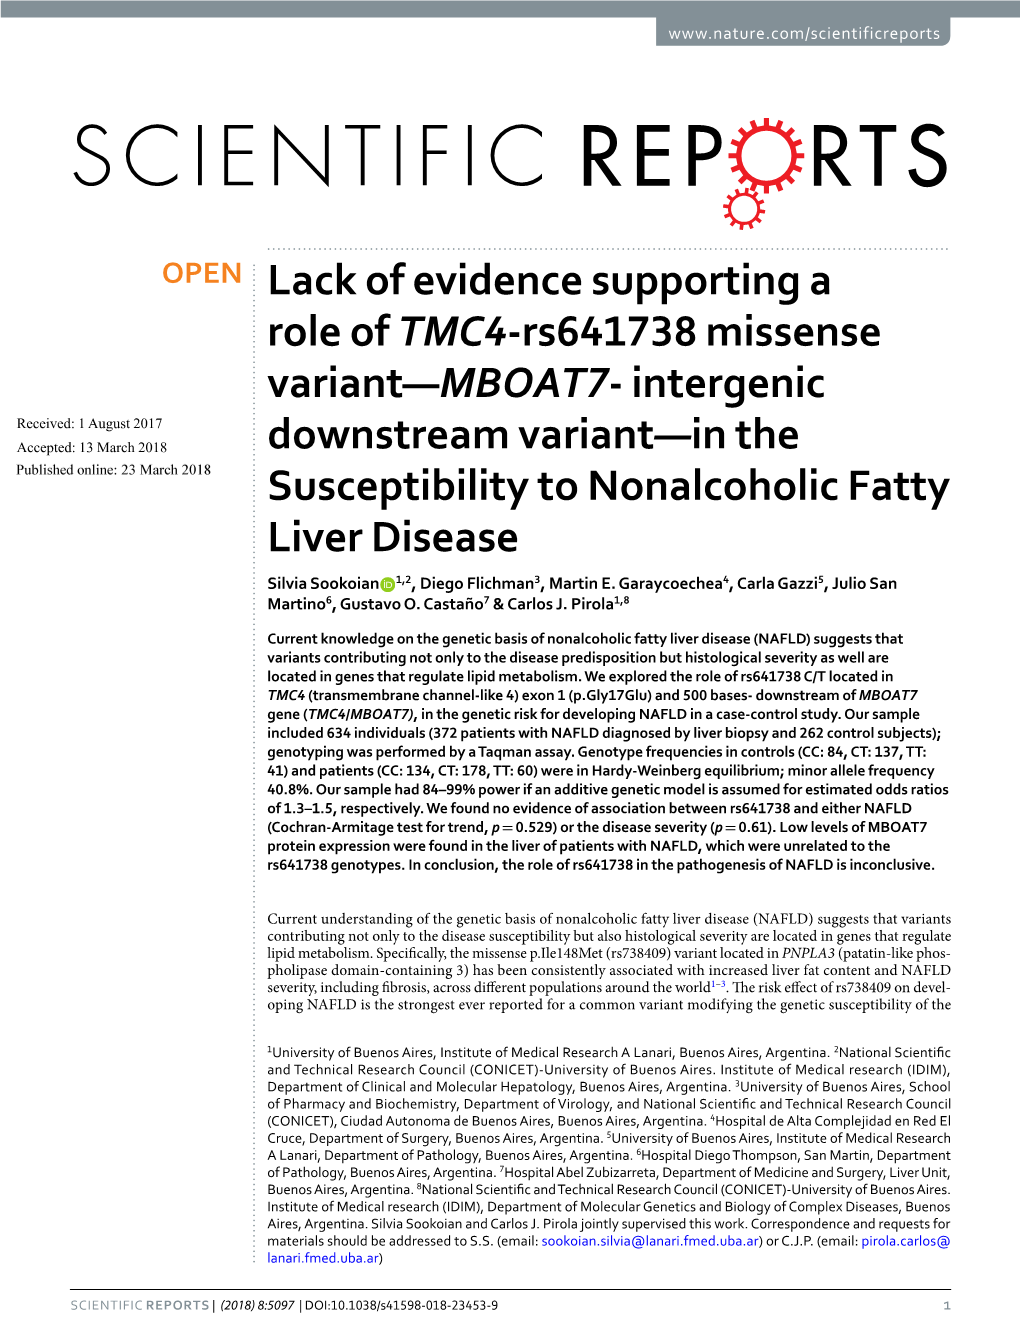 Lack of Evidence Supporting a Role of TMC4-Rs641738 Missense Variant—MBOAT7